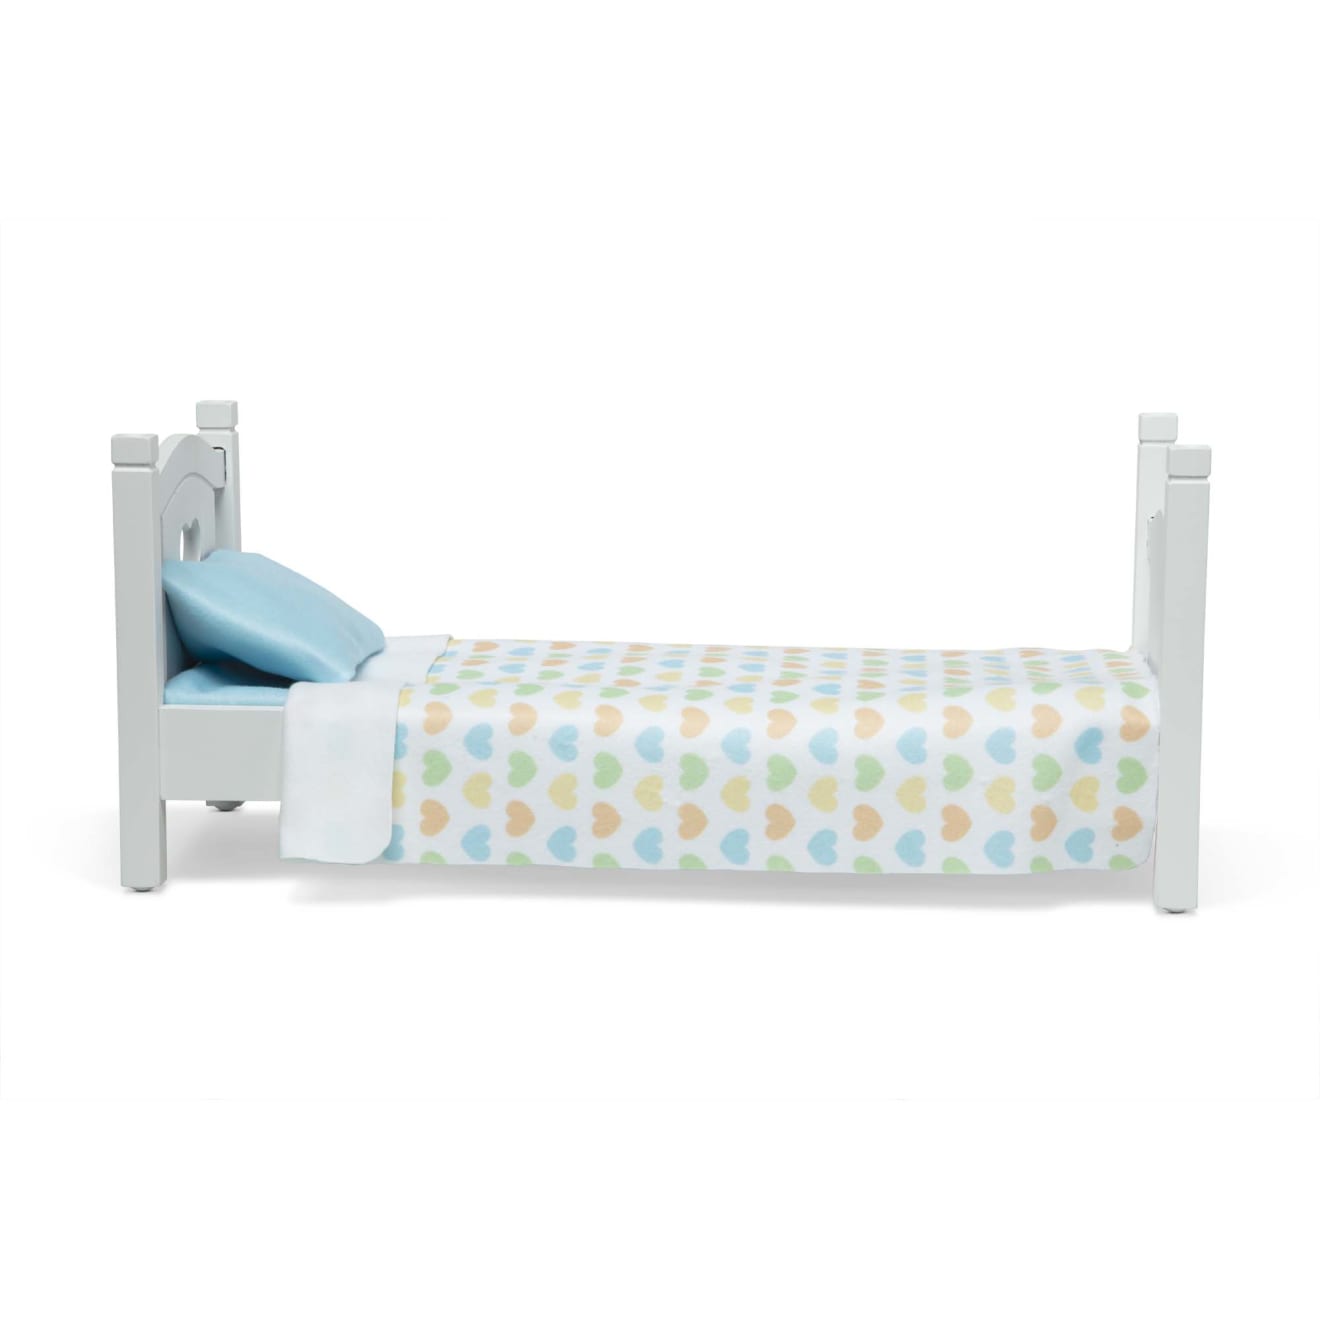 baby doll bed